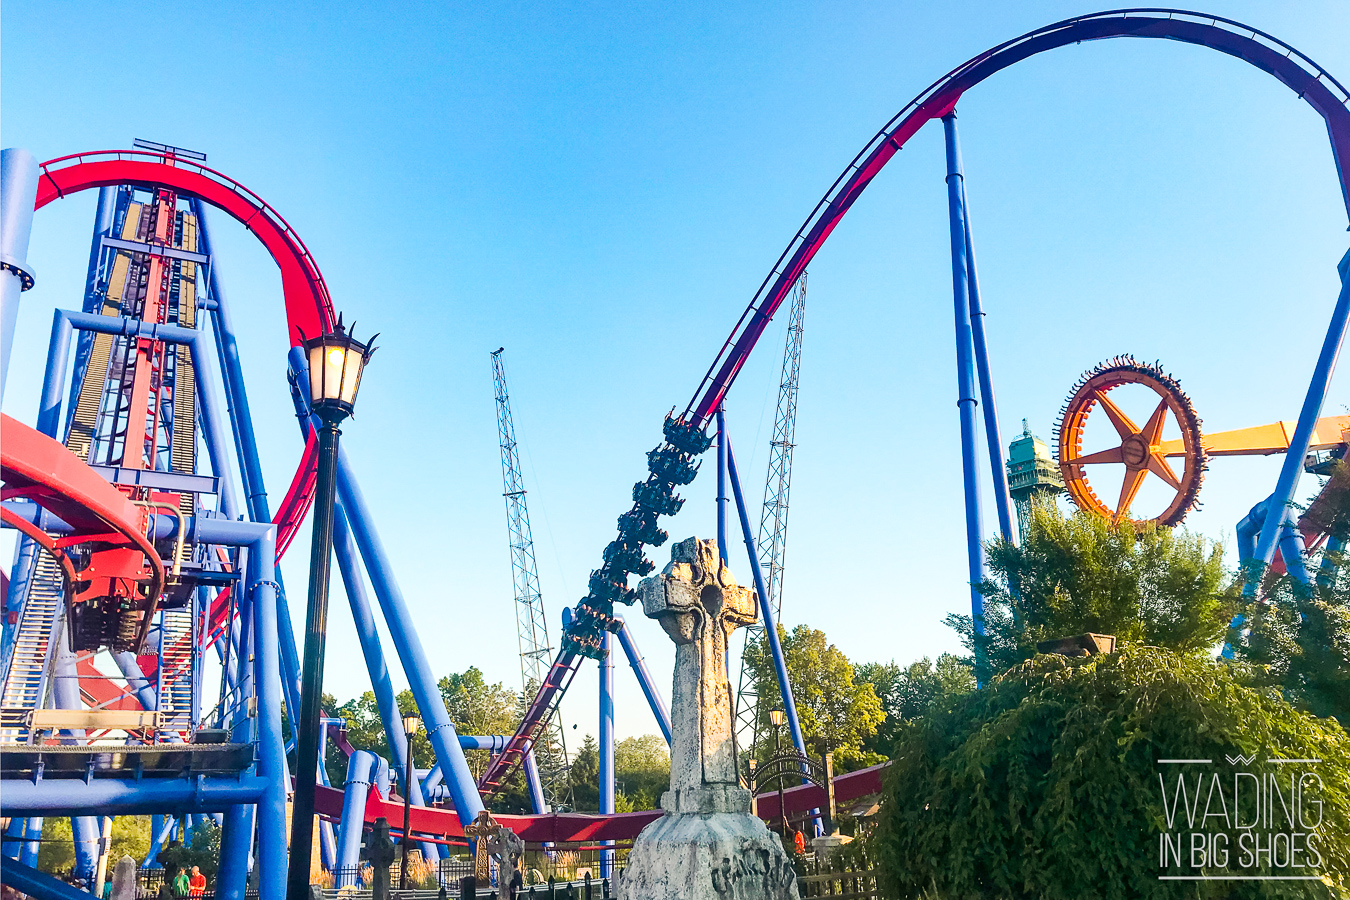 Wading in Big Shoes - Just How Scary Are The Roller Coasters at Kings Island? (Ride Guide & Review)